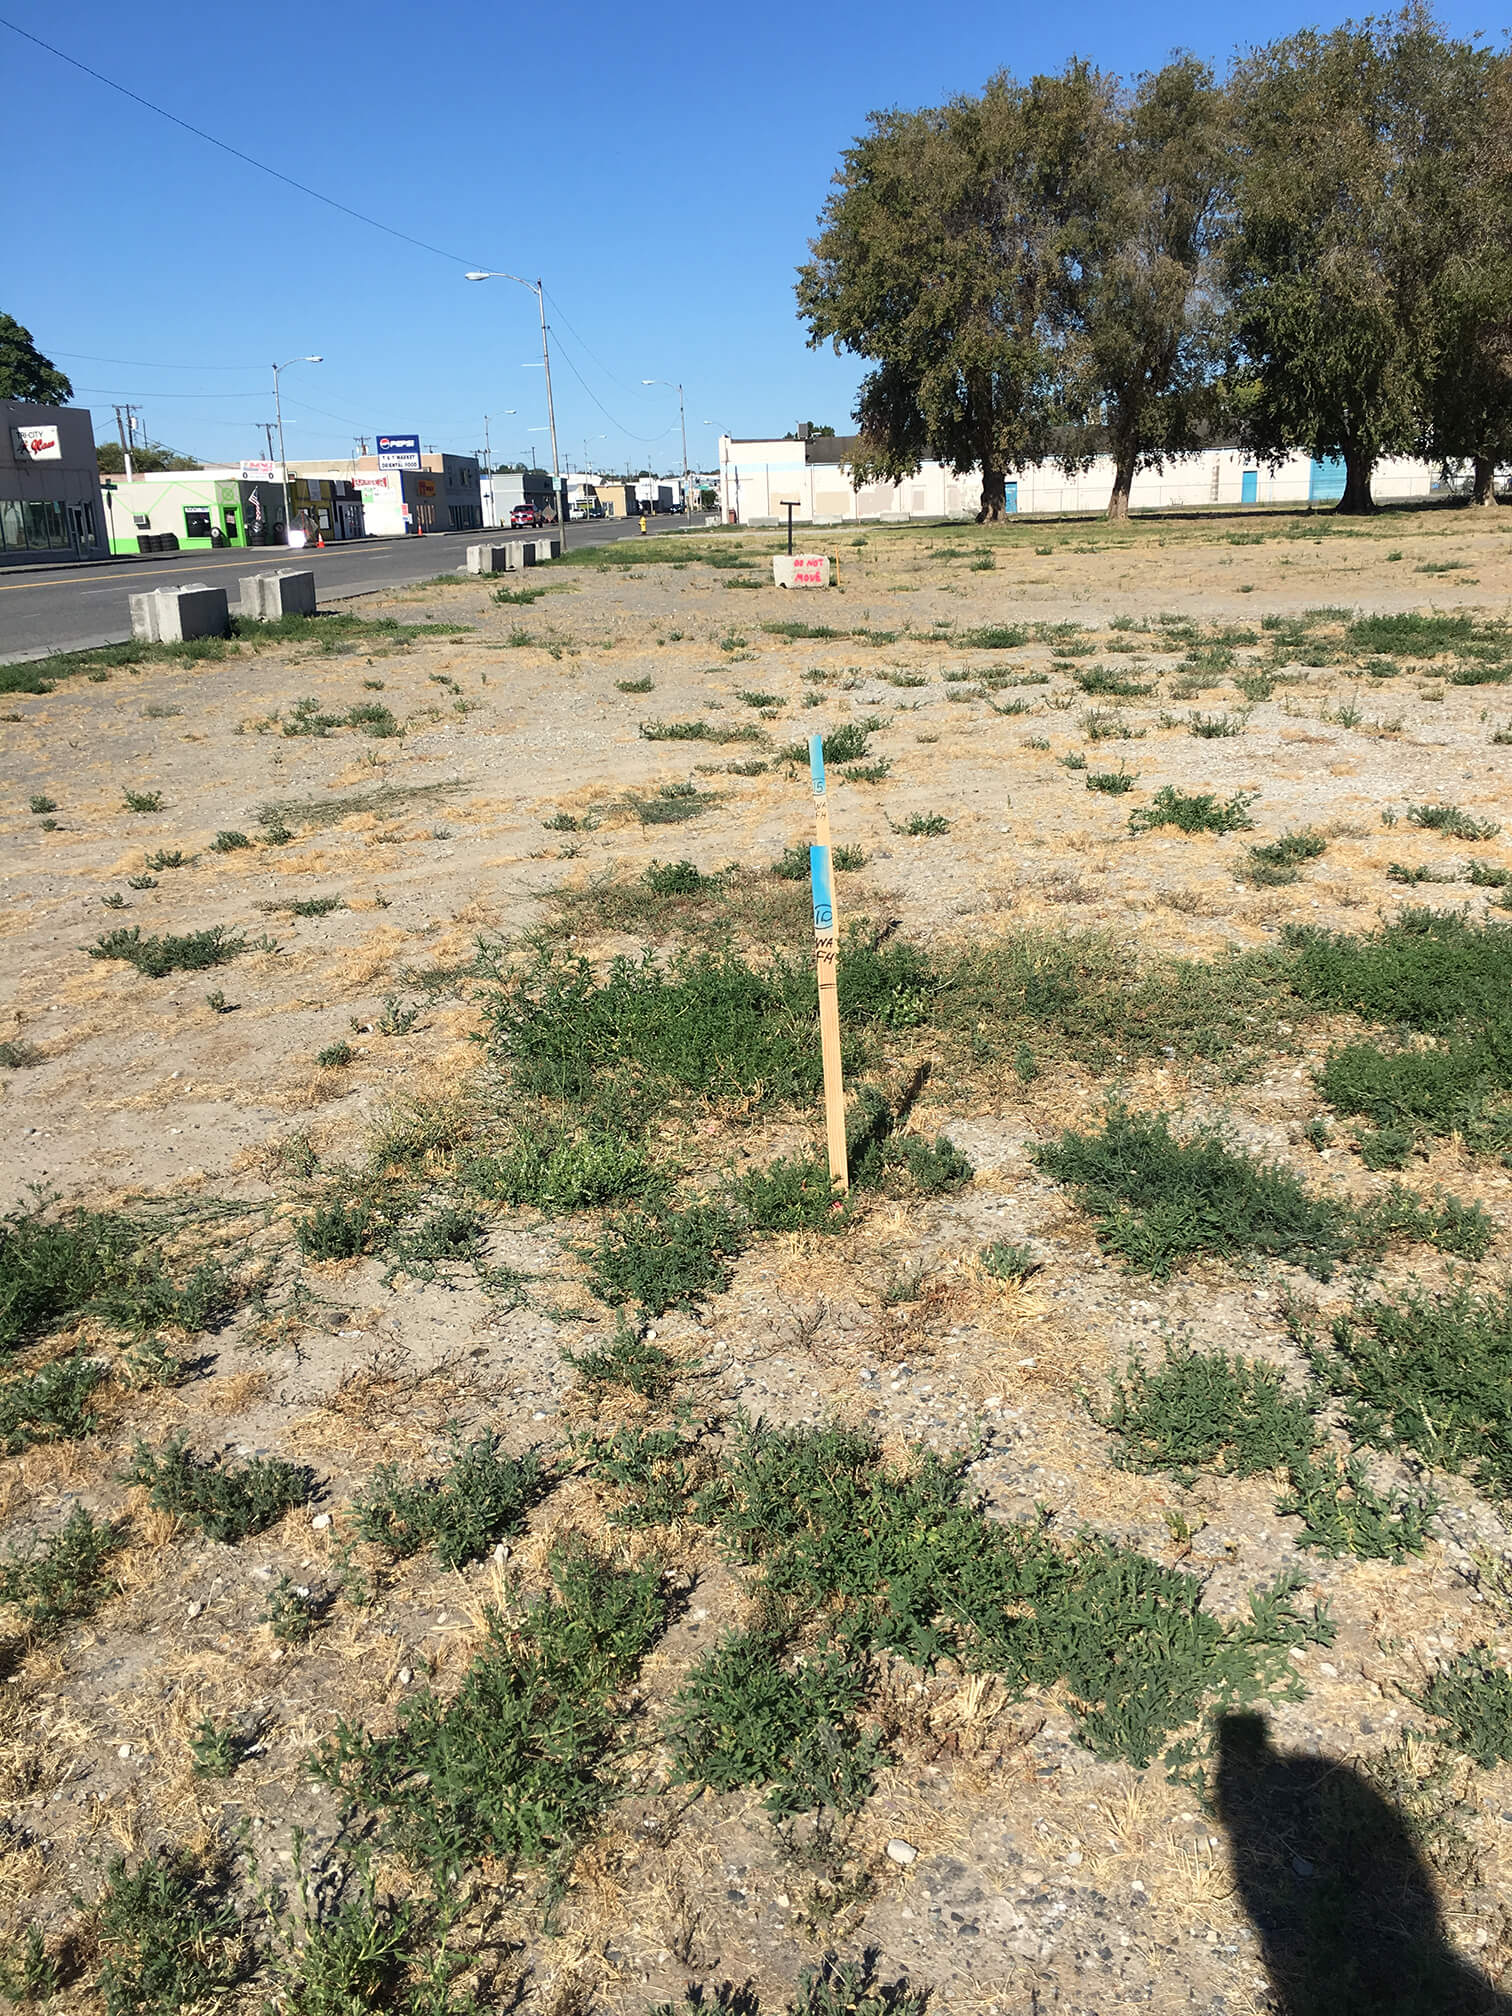 Survey stake in ground before construction.